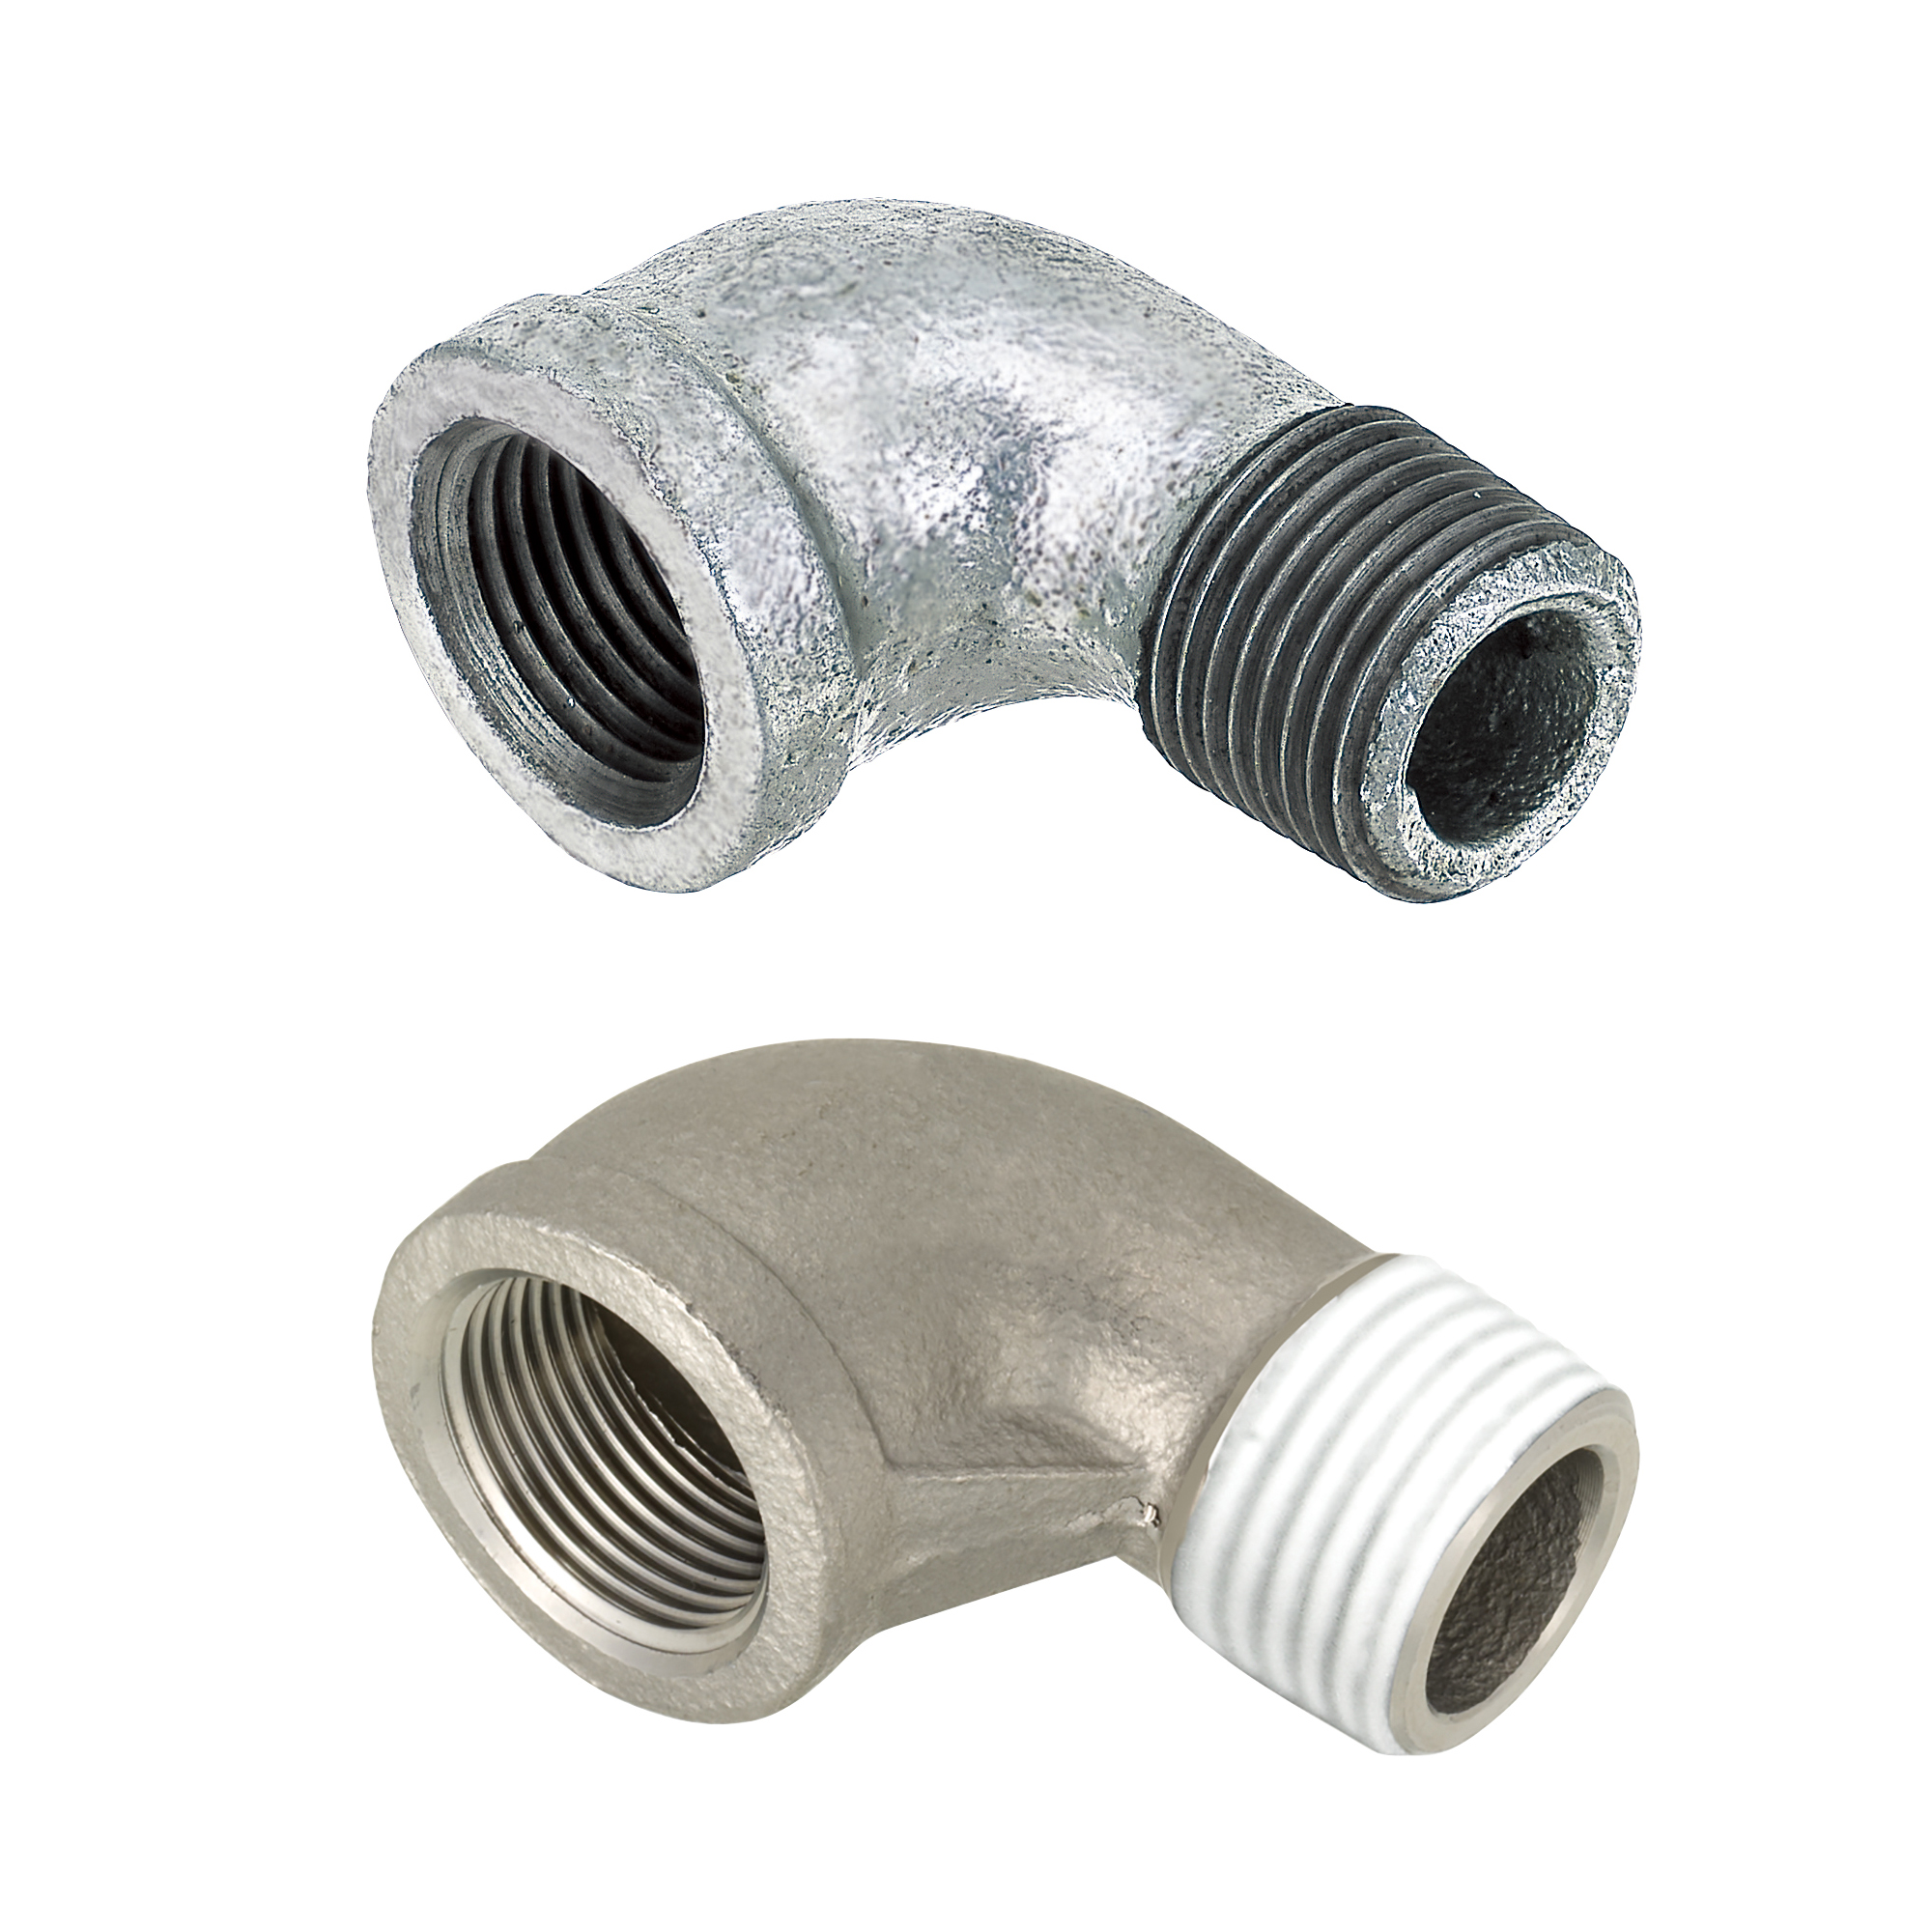 Low Pressure Fittings/90 Deg. Elbow/Threaded and Tapped (SGCEL6A) 